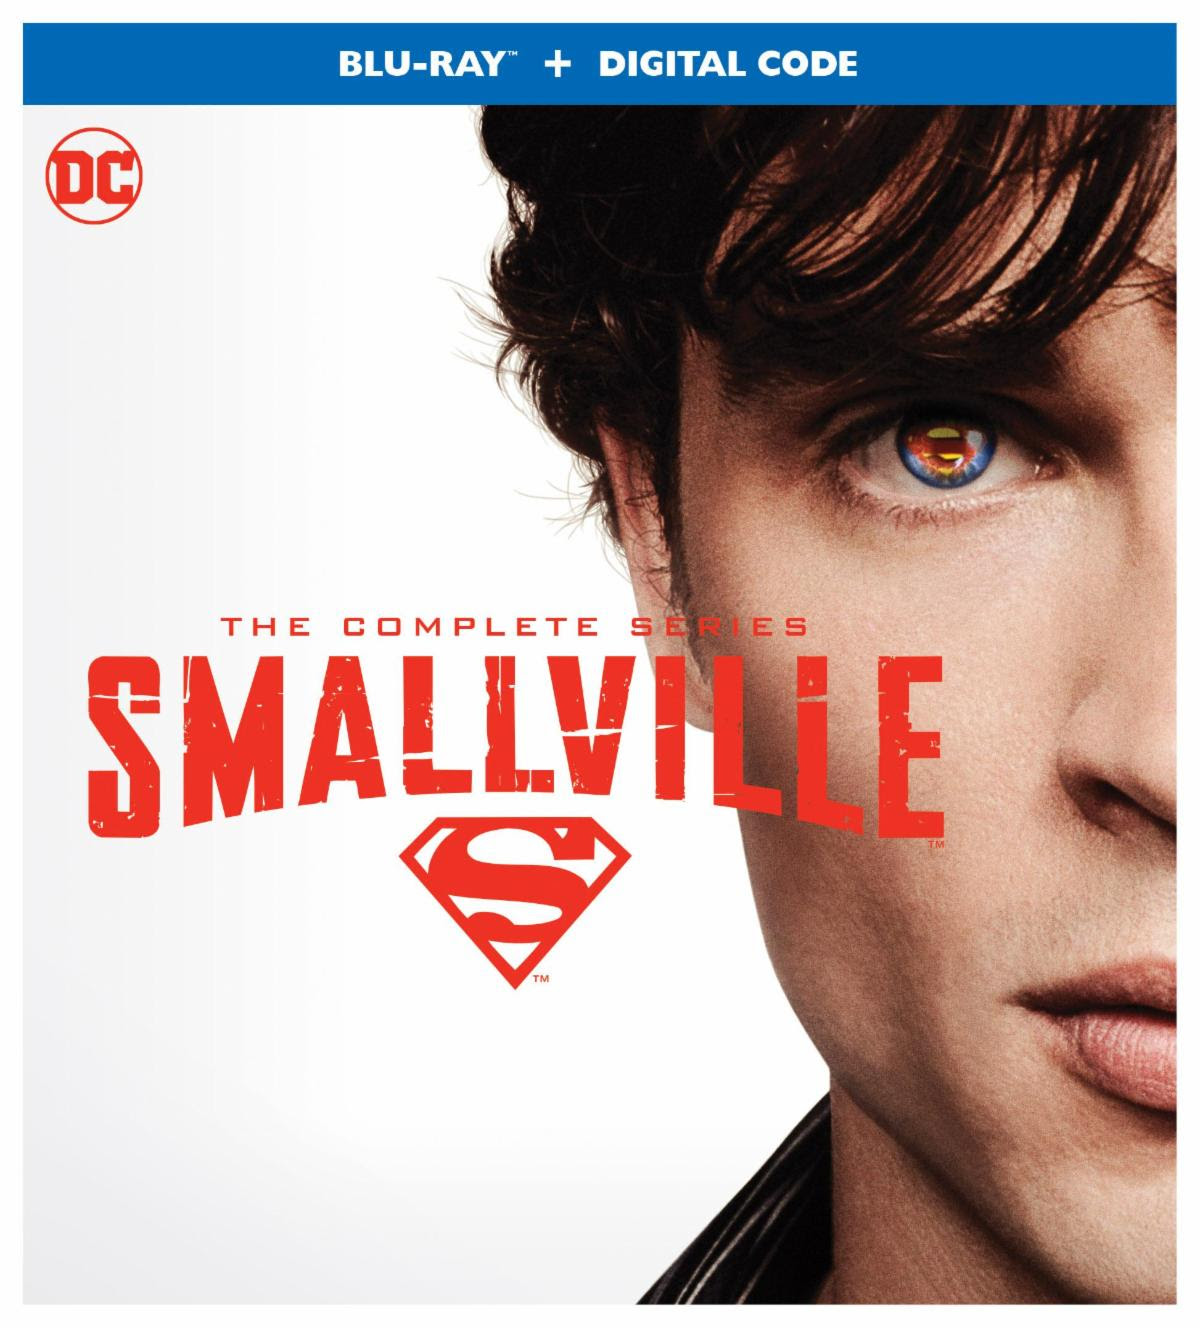 Smallville: The Complete Series 20th Anniversary Edition – Soaring Onto Blu-ray For The First Time Ever On 10/19/21